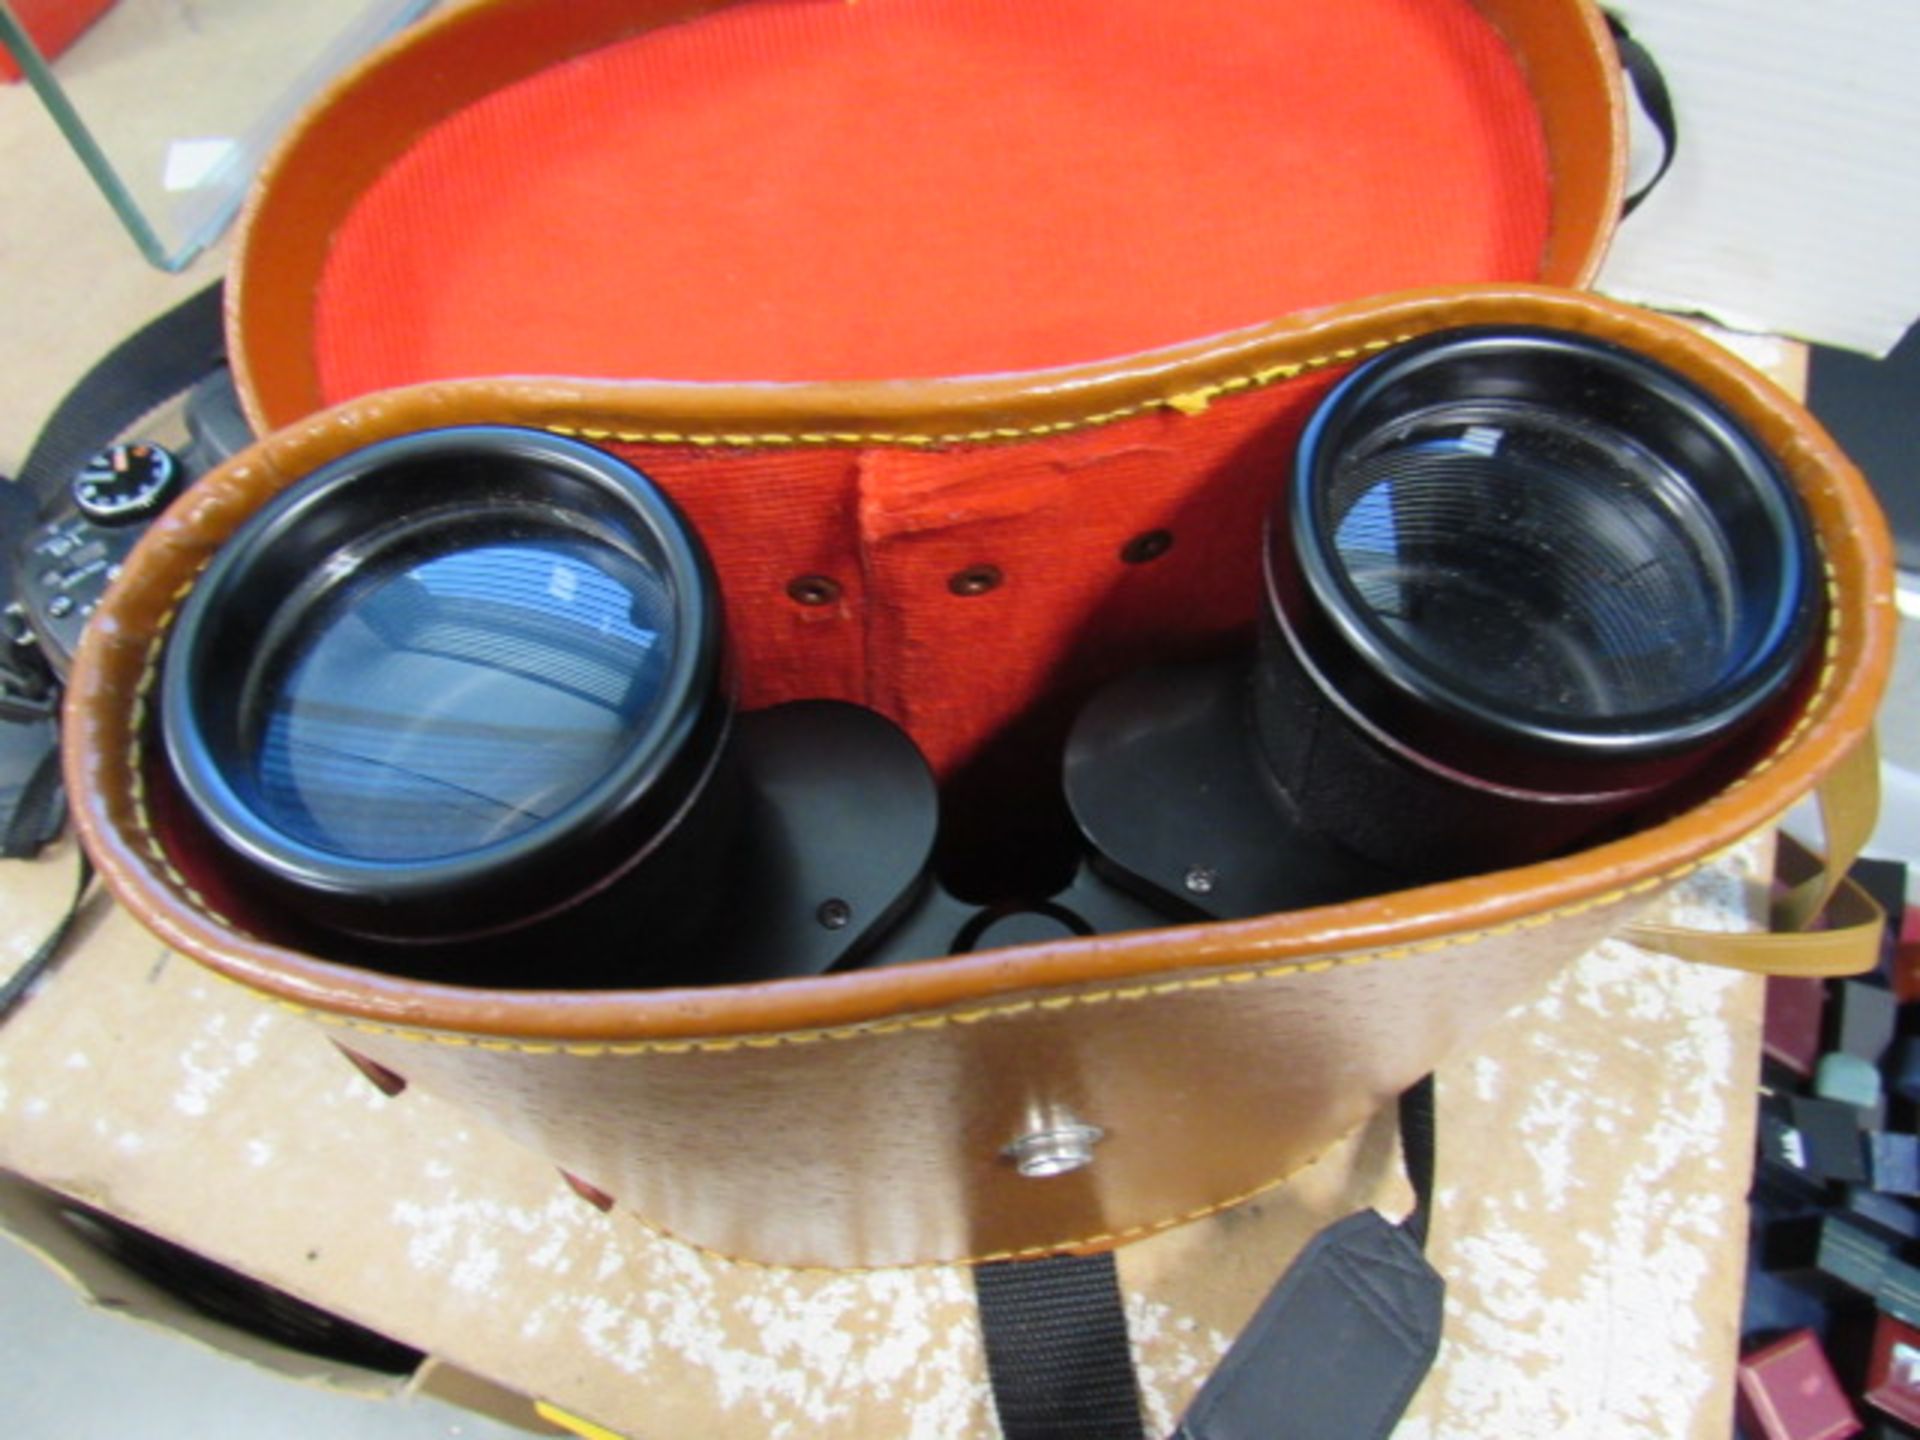 Pair of Proloisirs 12 x 50 binoculars with leather case